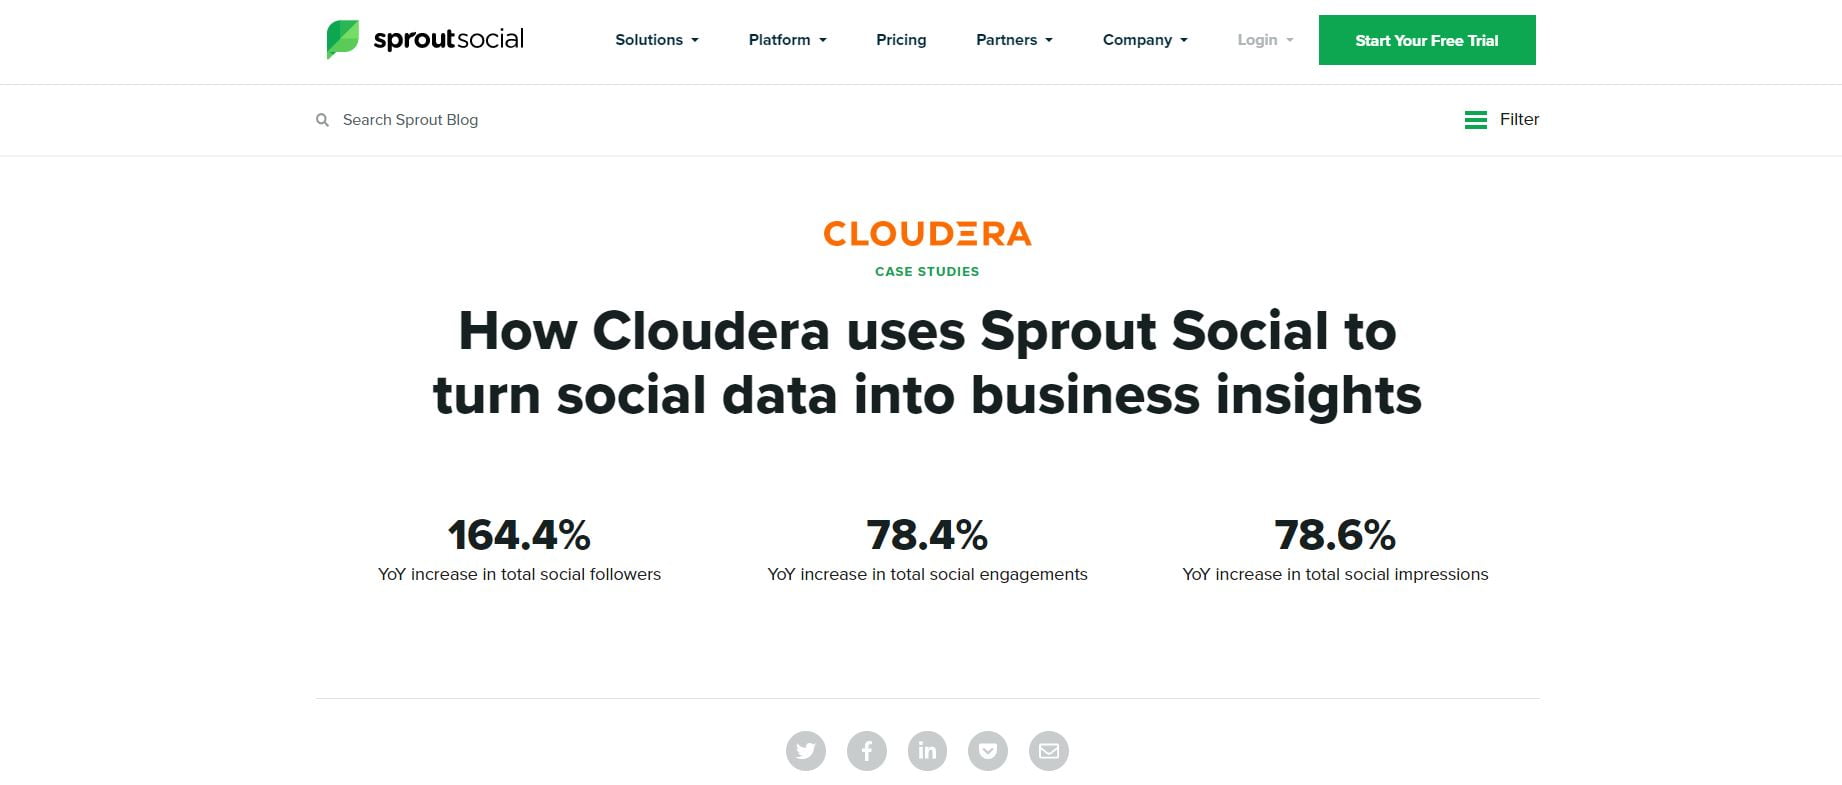 SproutSocial case study page